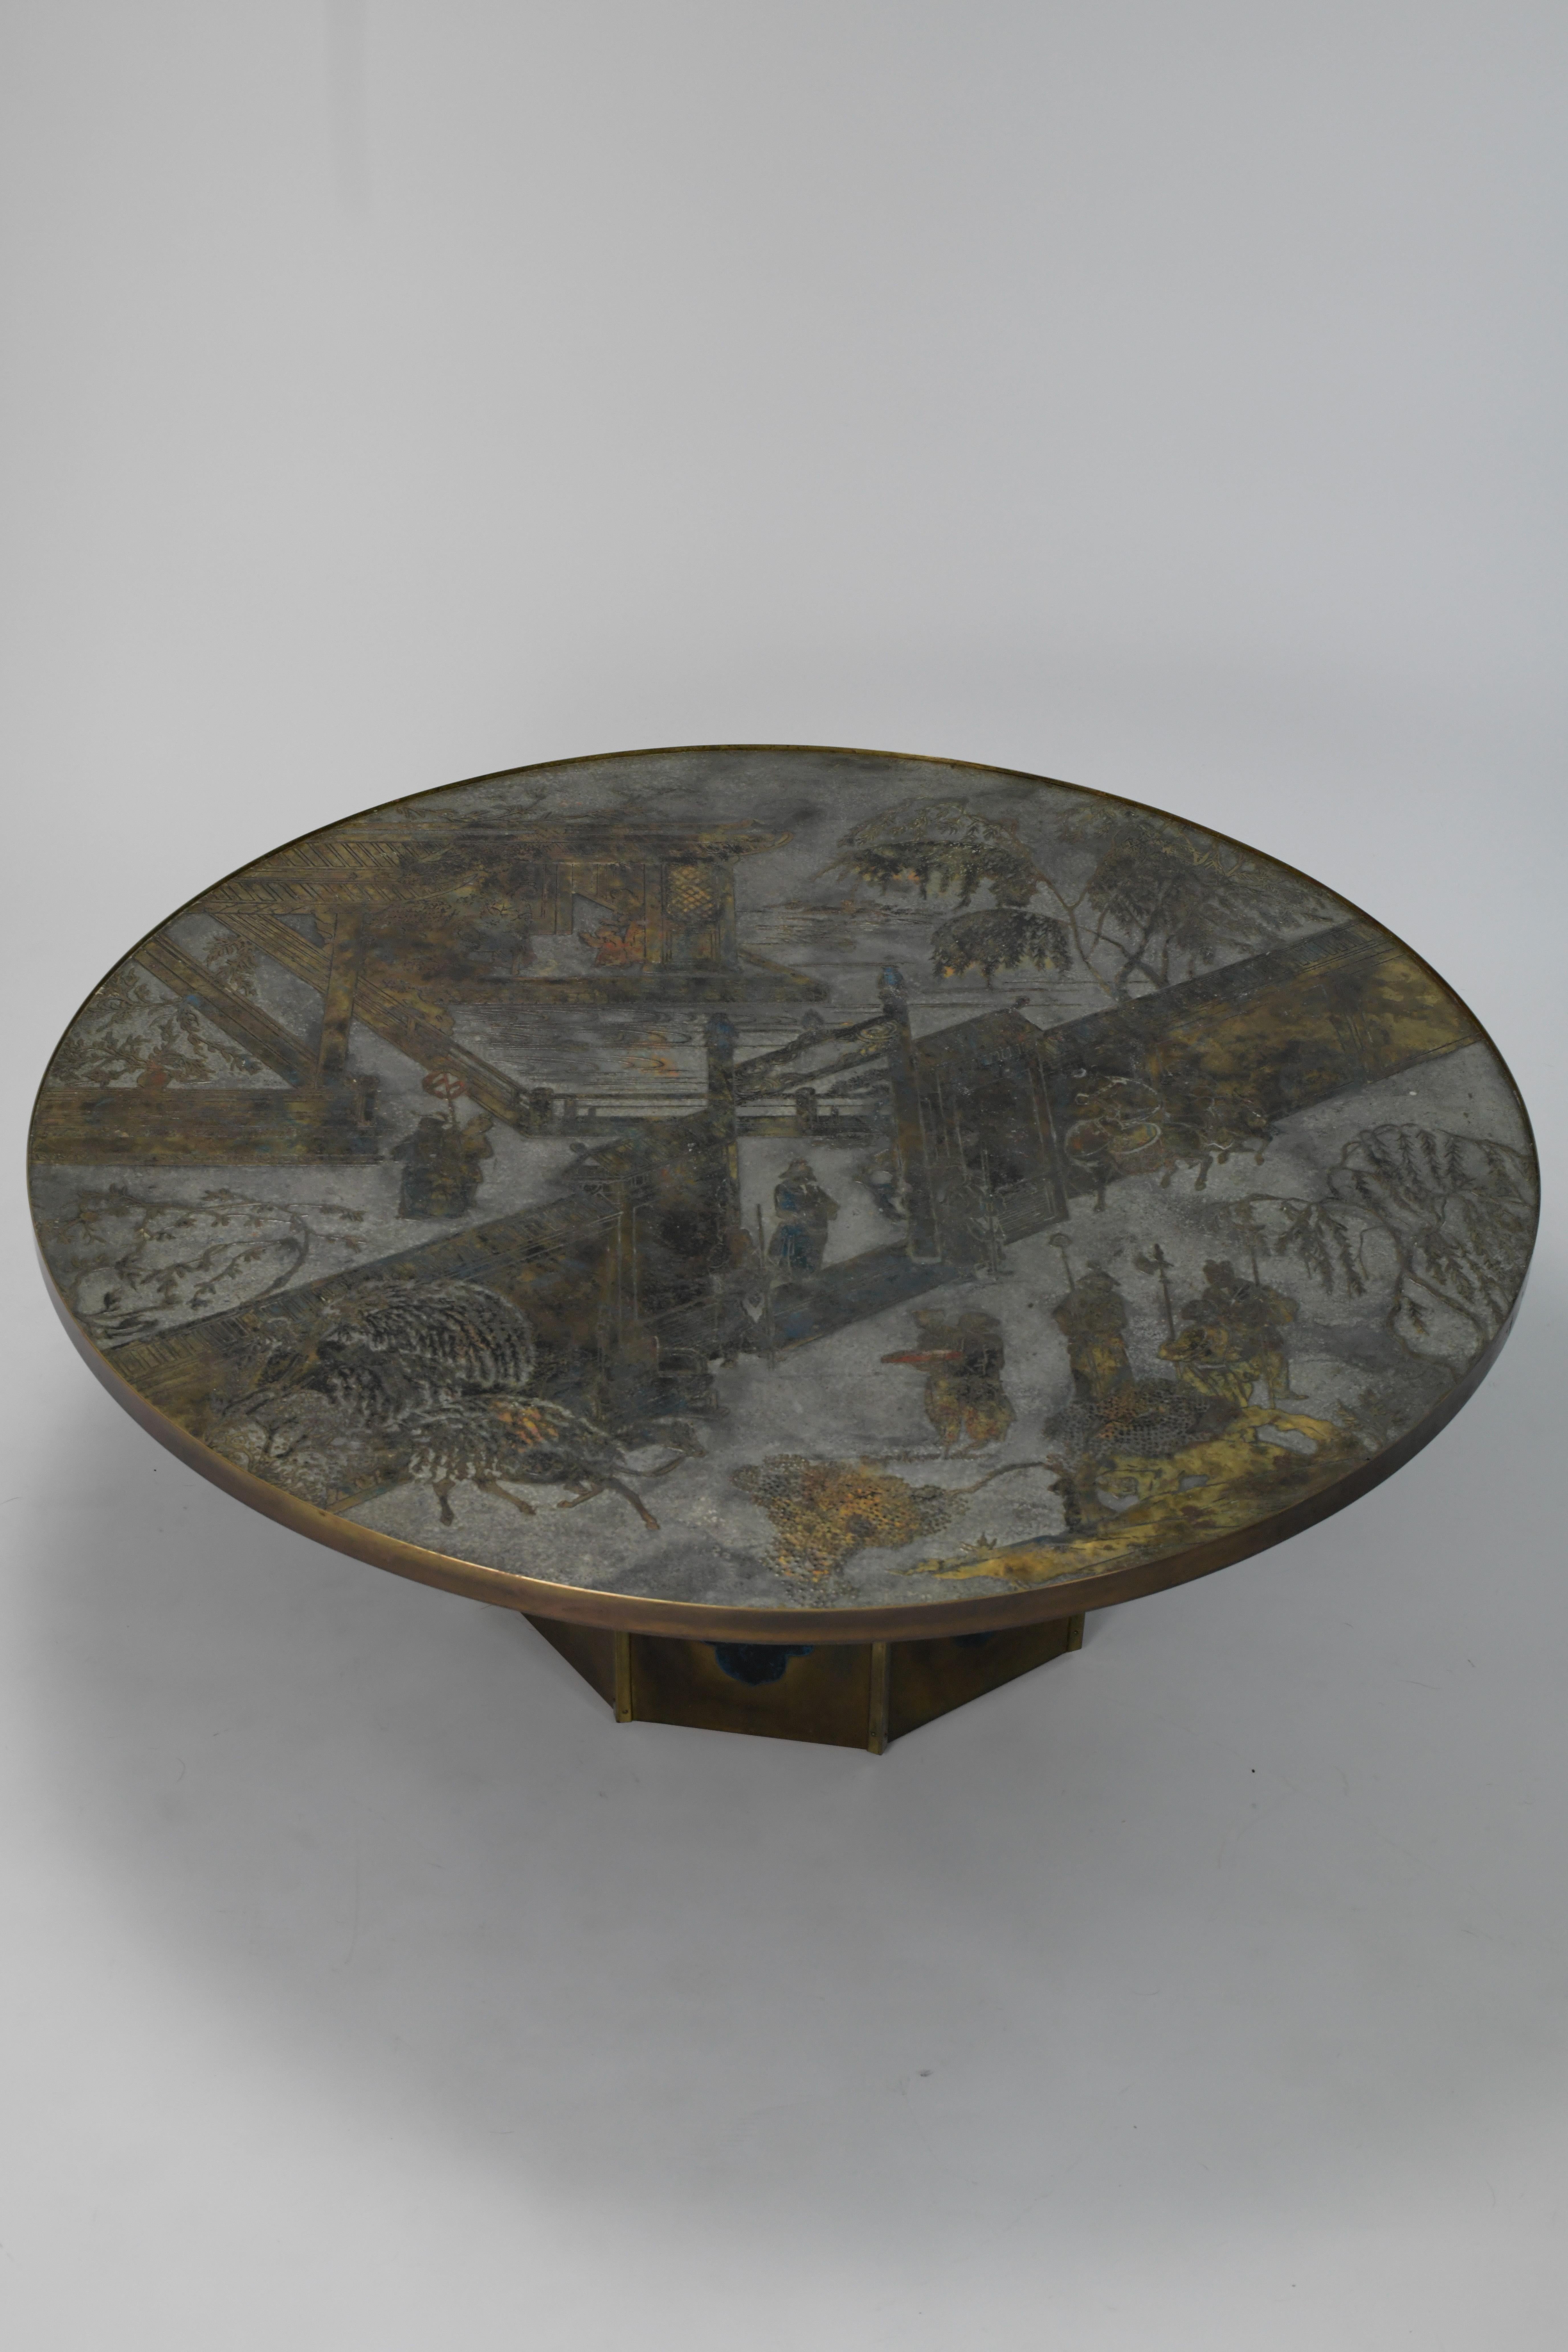 Beautiful 1960s Philip and Kelvin LaVerne Chan coffee table. This table from the iconic father & son duo is in great vintage condition and has a really nice age appropriate patina with some beautiful coloring on the table top. It's guaranteed to